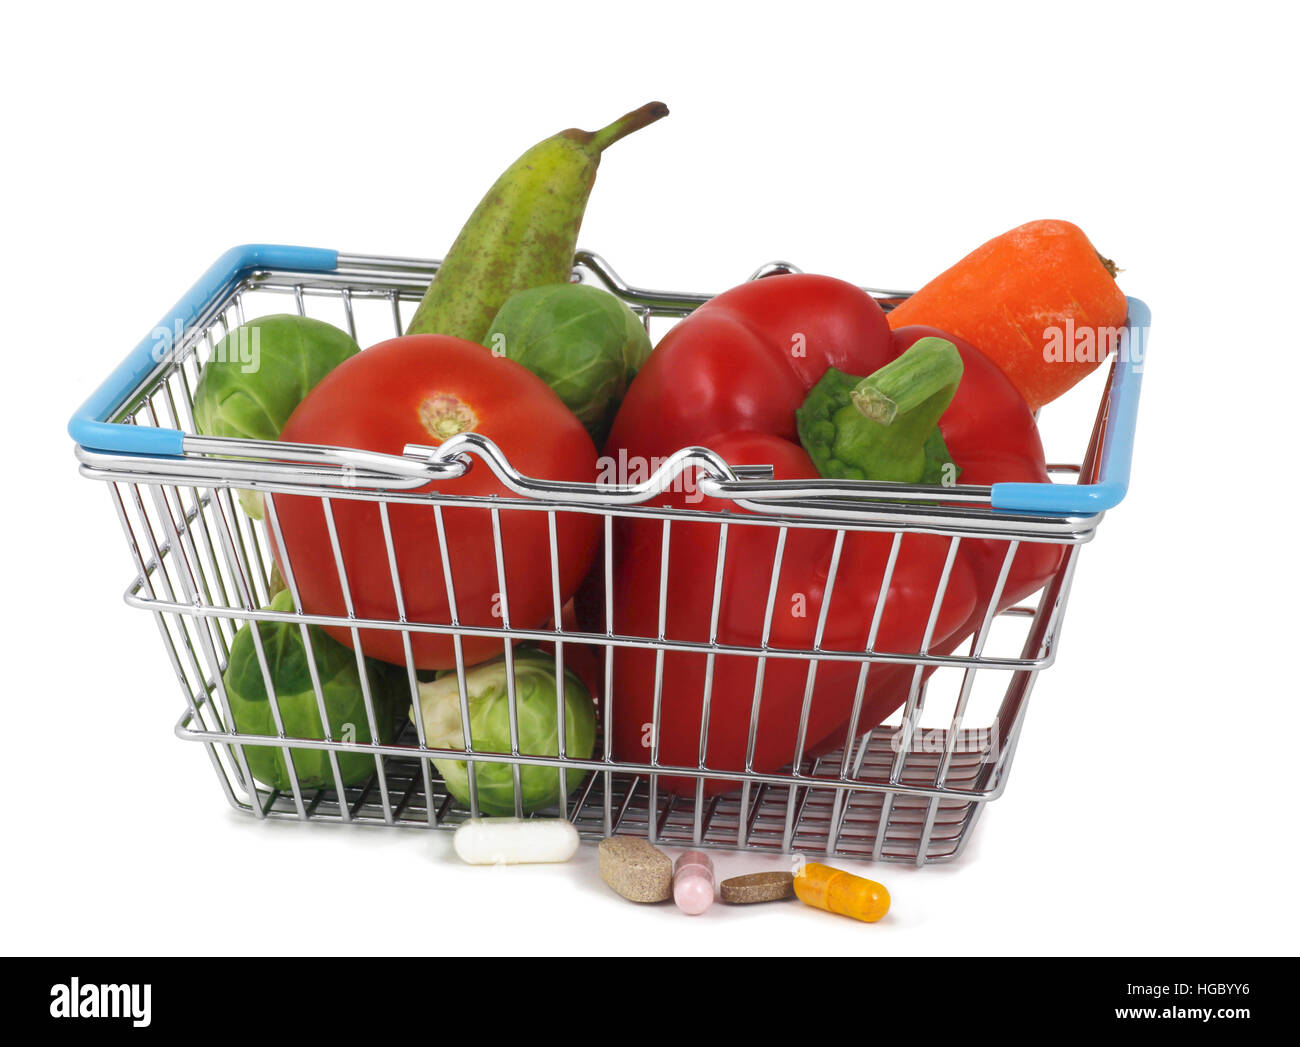 Shop for healthy food and supplements - a small shopping basket containing healthy fresh fruit and vegetables and five different health supplements Stock Photo